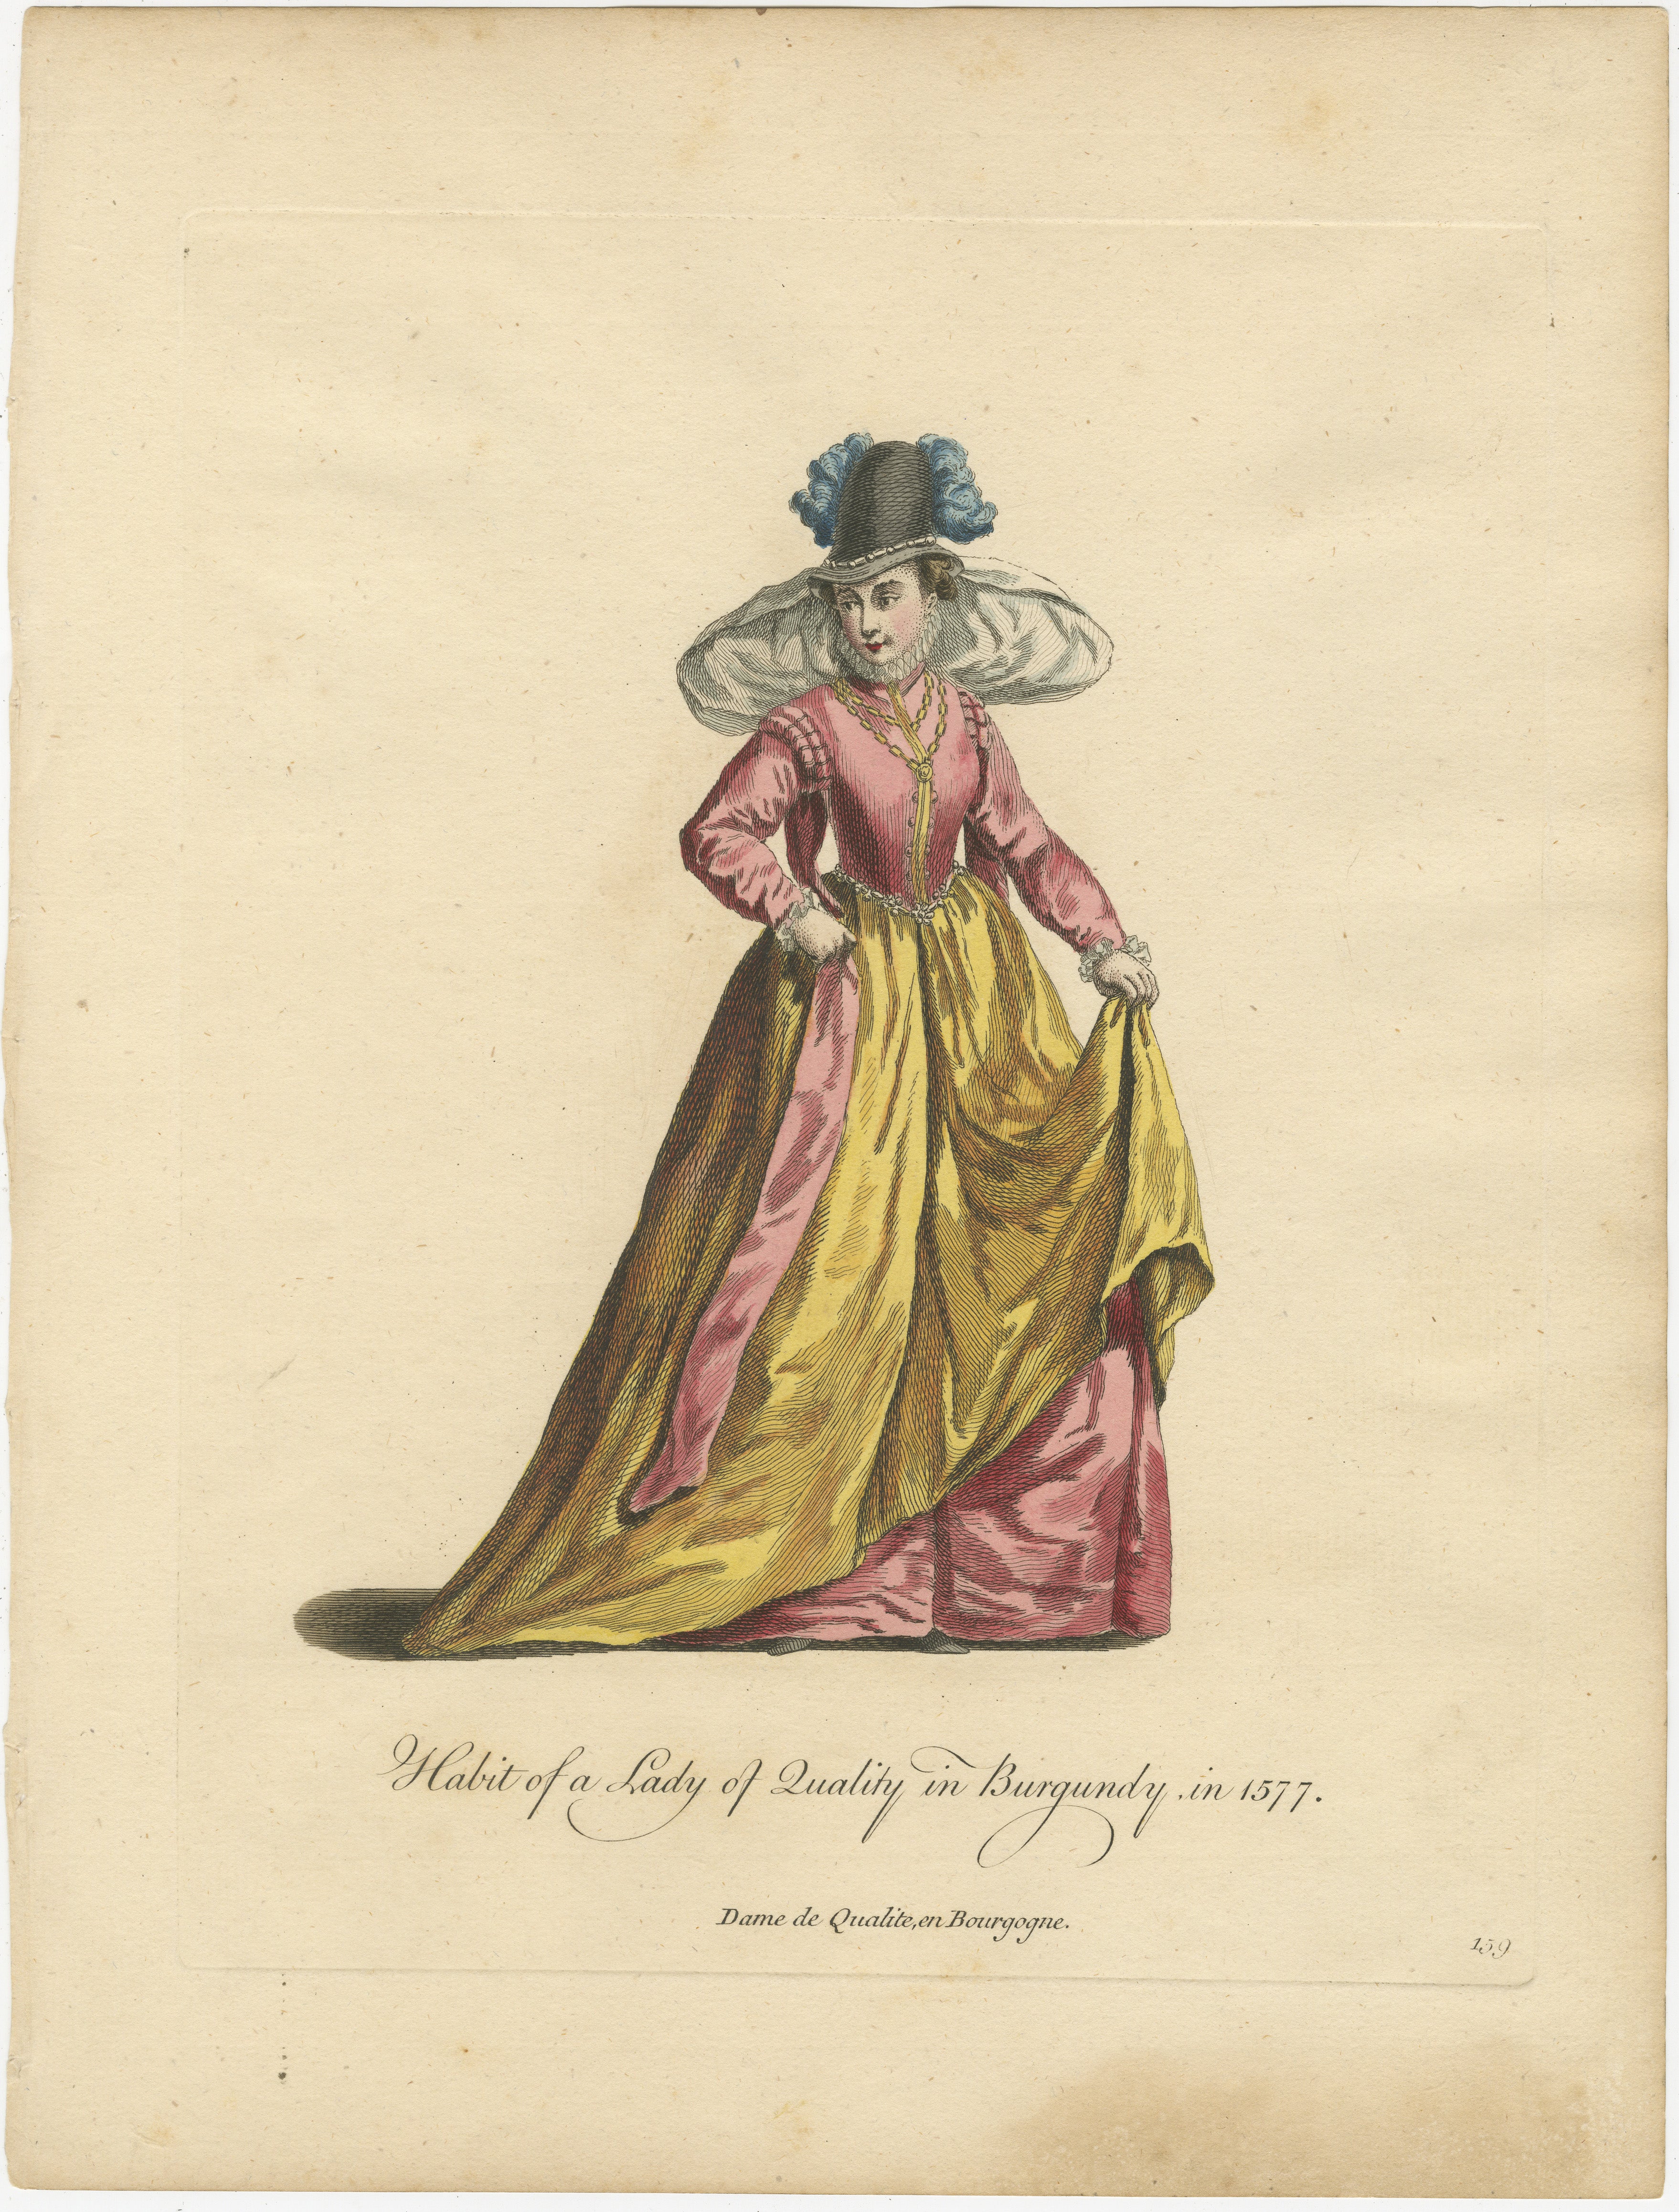 The image is a colored print depicting a 